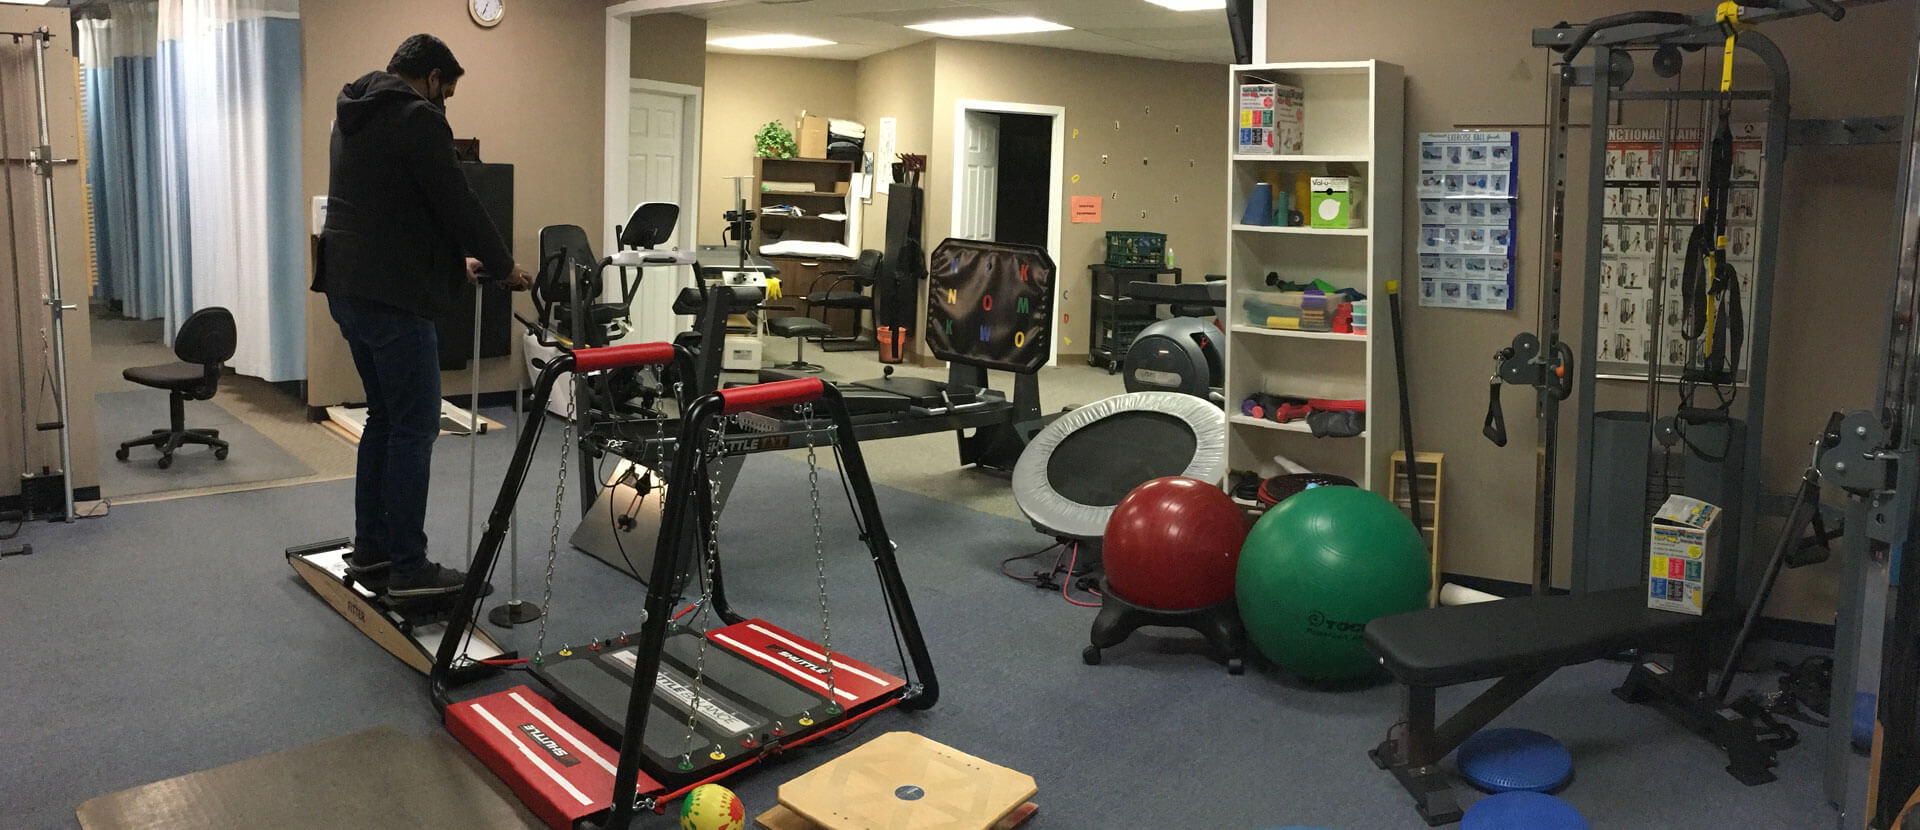 Memorial East Physical Therapy Clinic: Physical Therapy, Acupuncture and Rehabilitation in Calgary